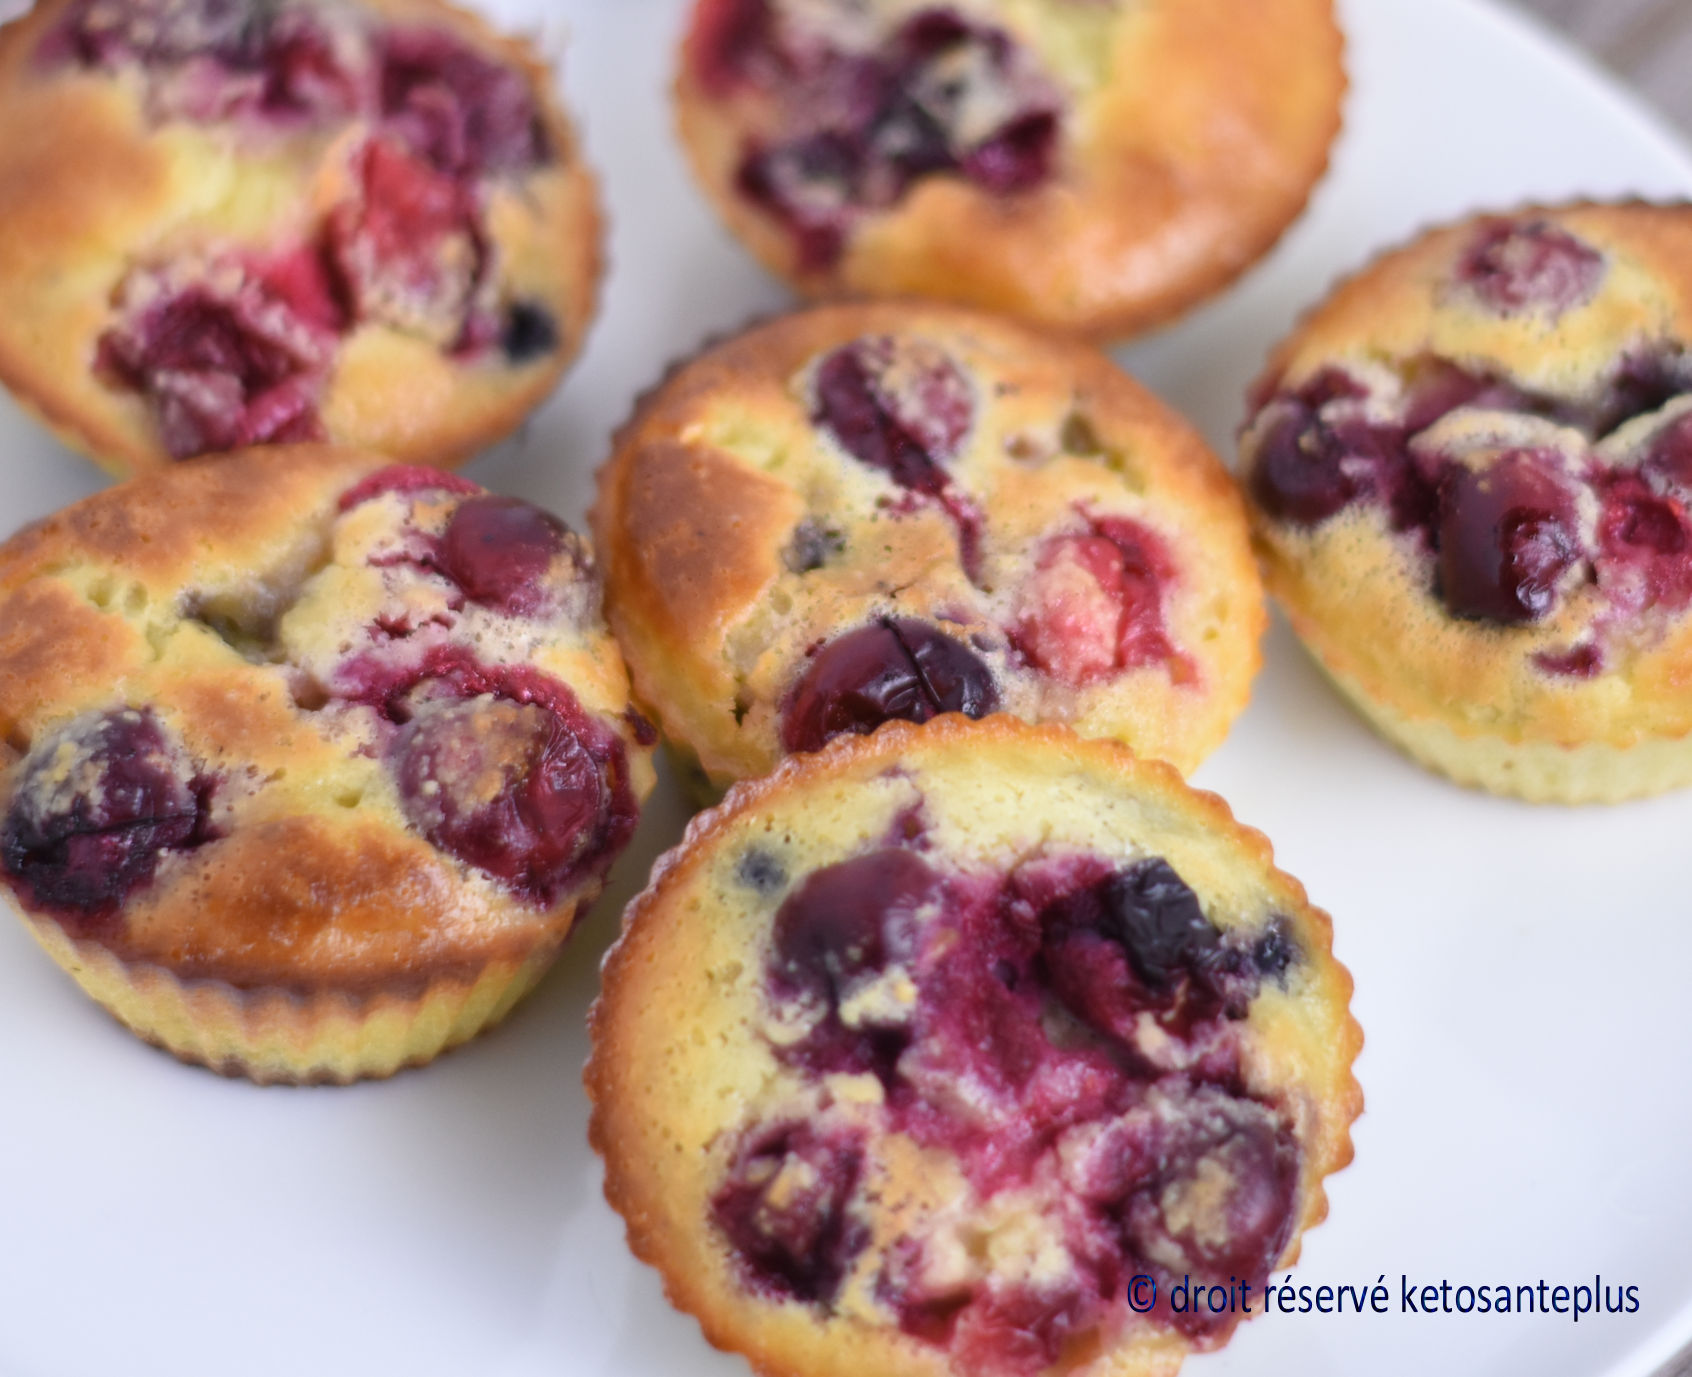 Muffins aux canneberges